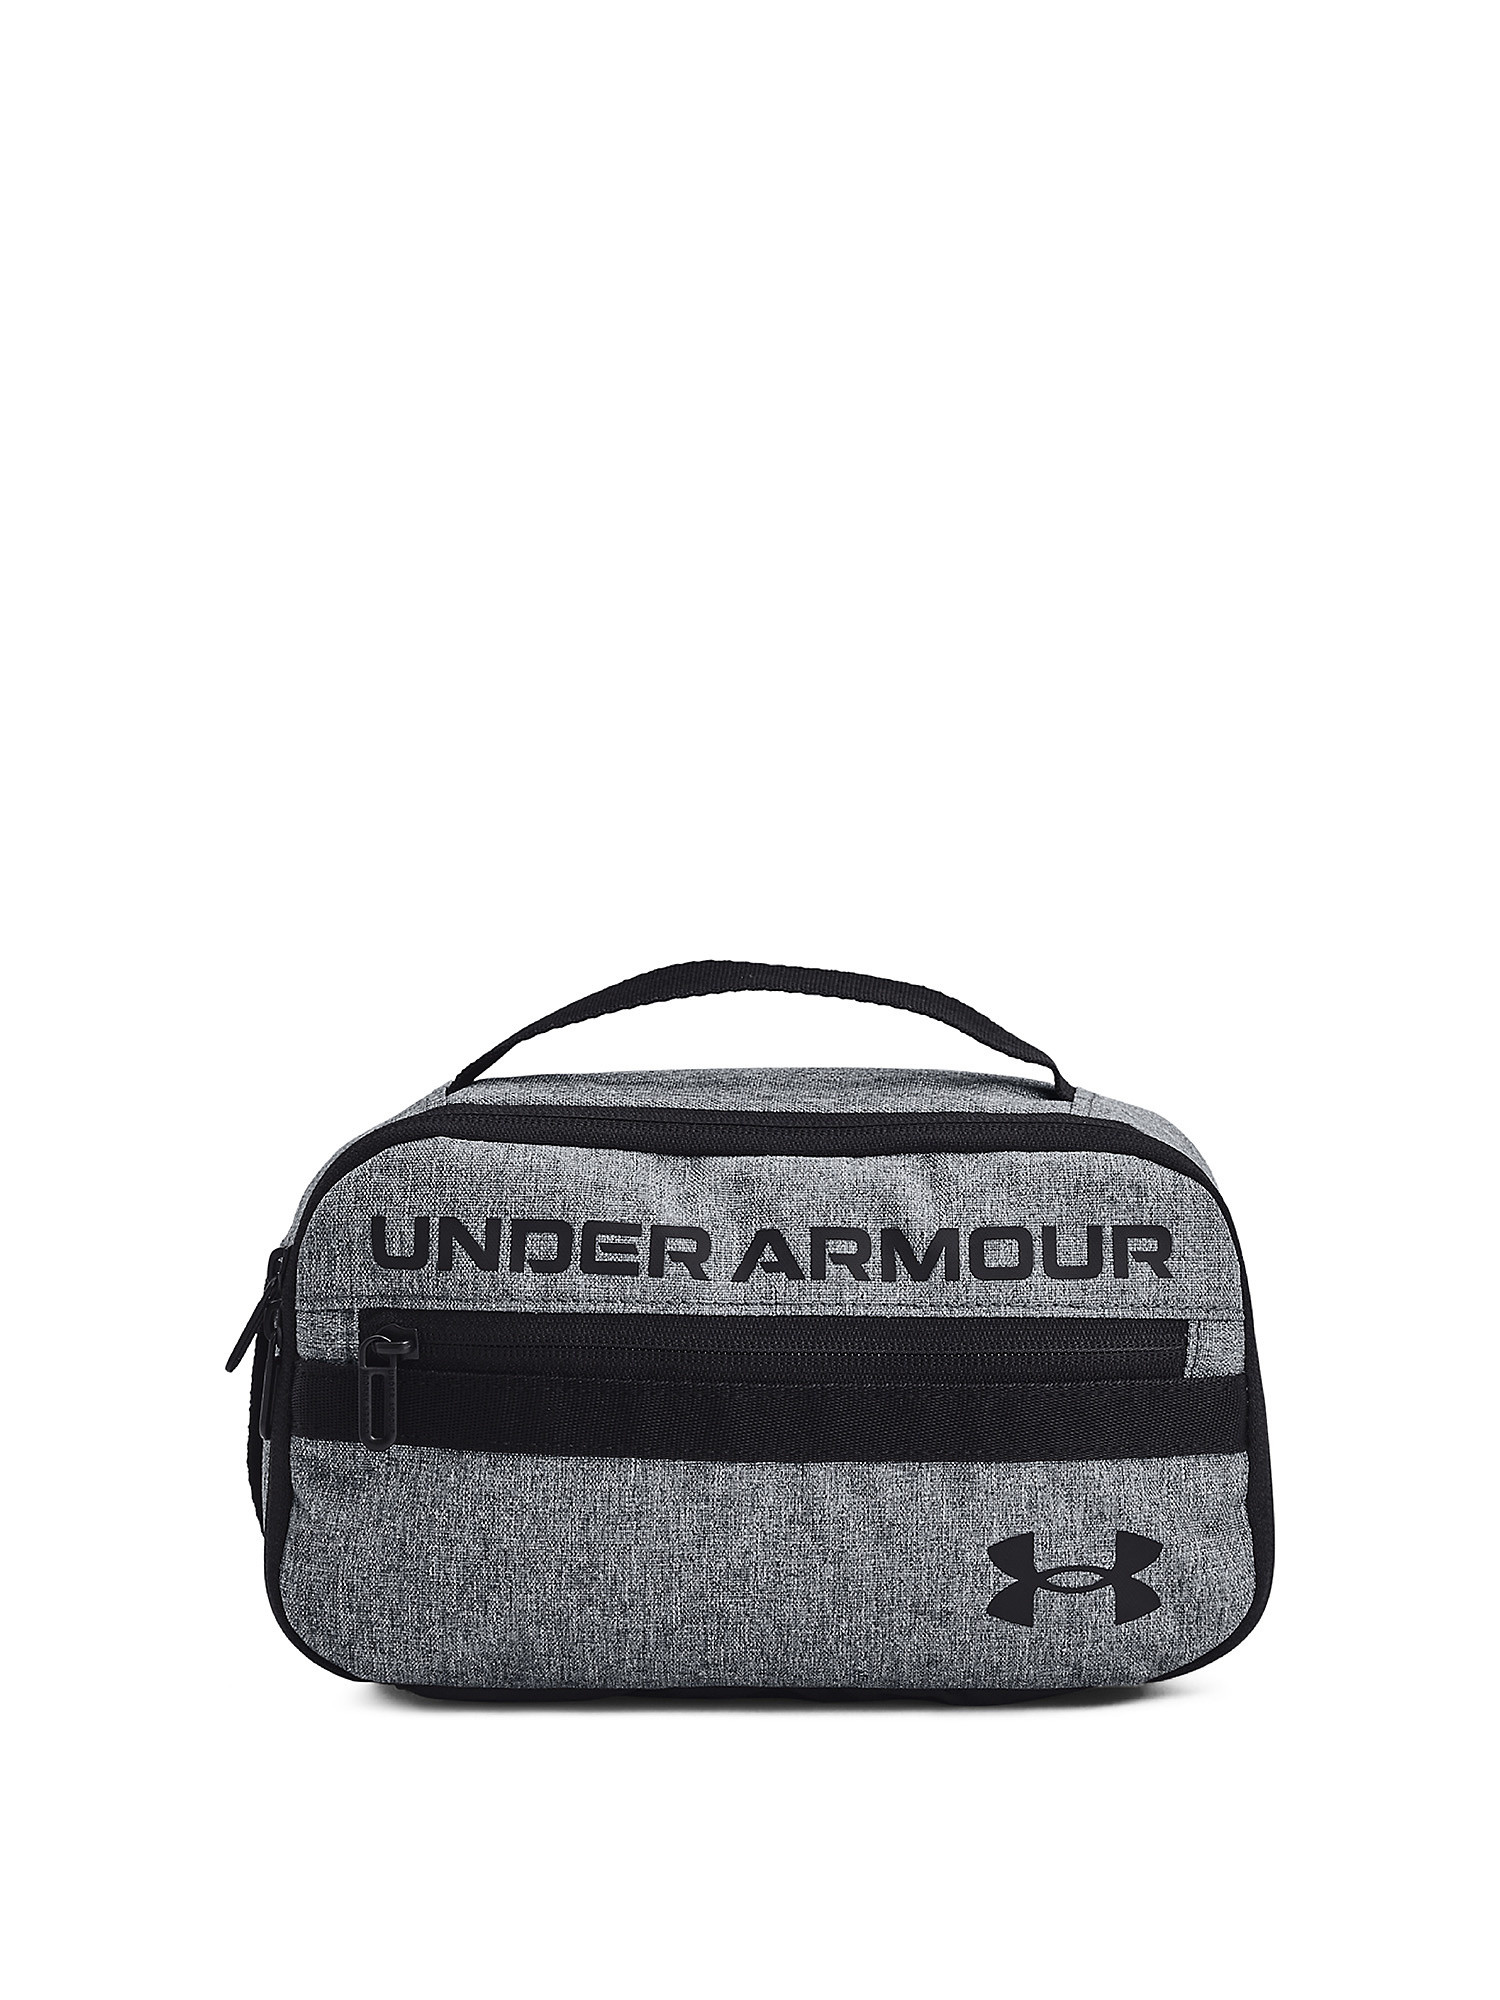 Under Armour - UA Contain Travel Travel Kit, Grey, large image number 0